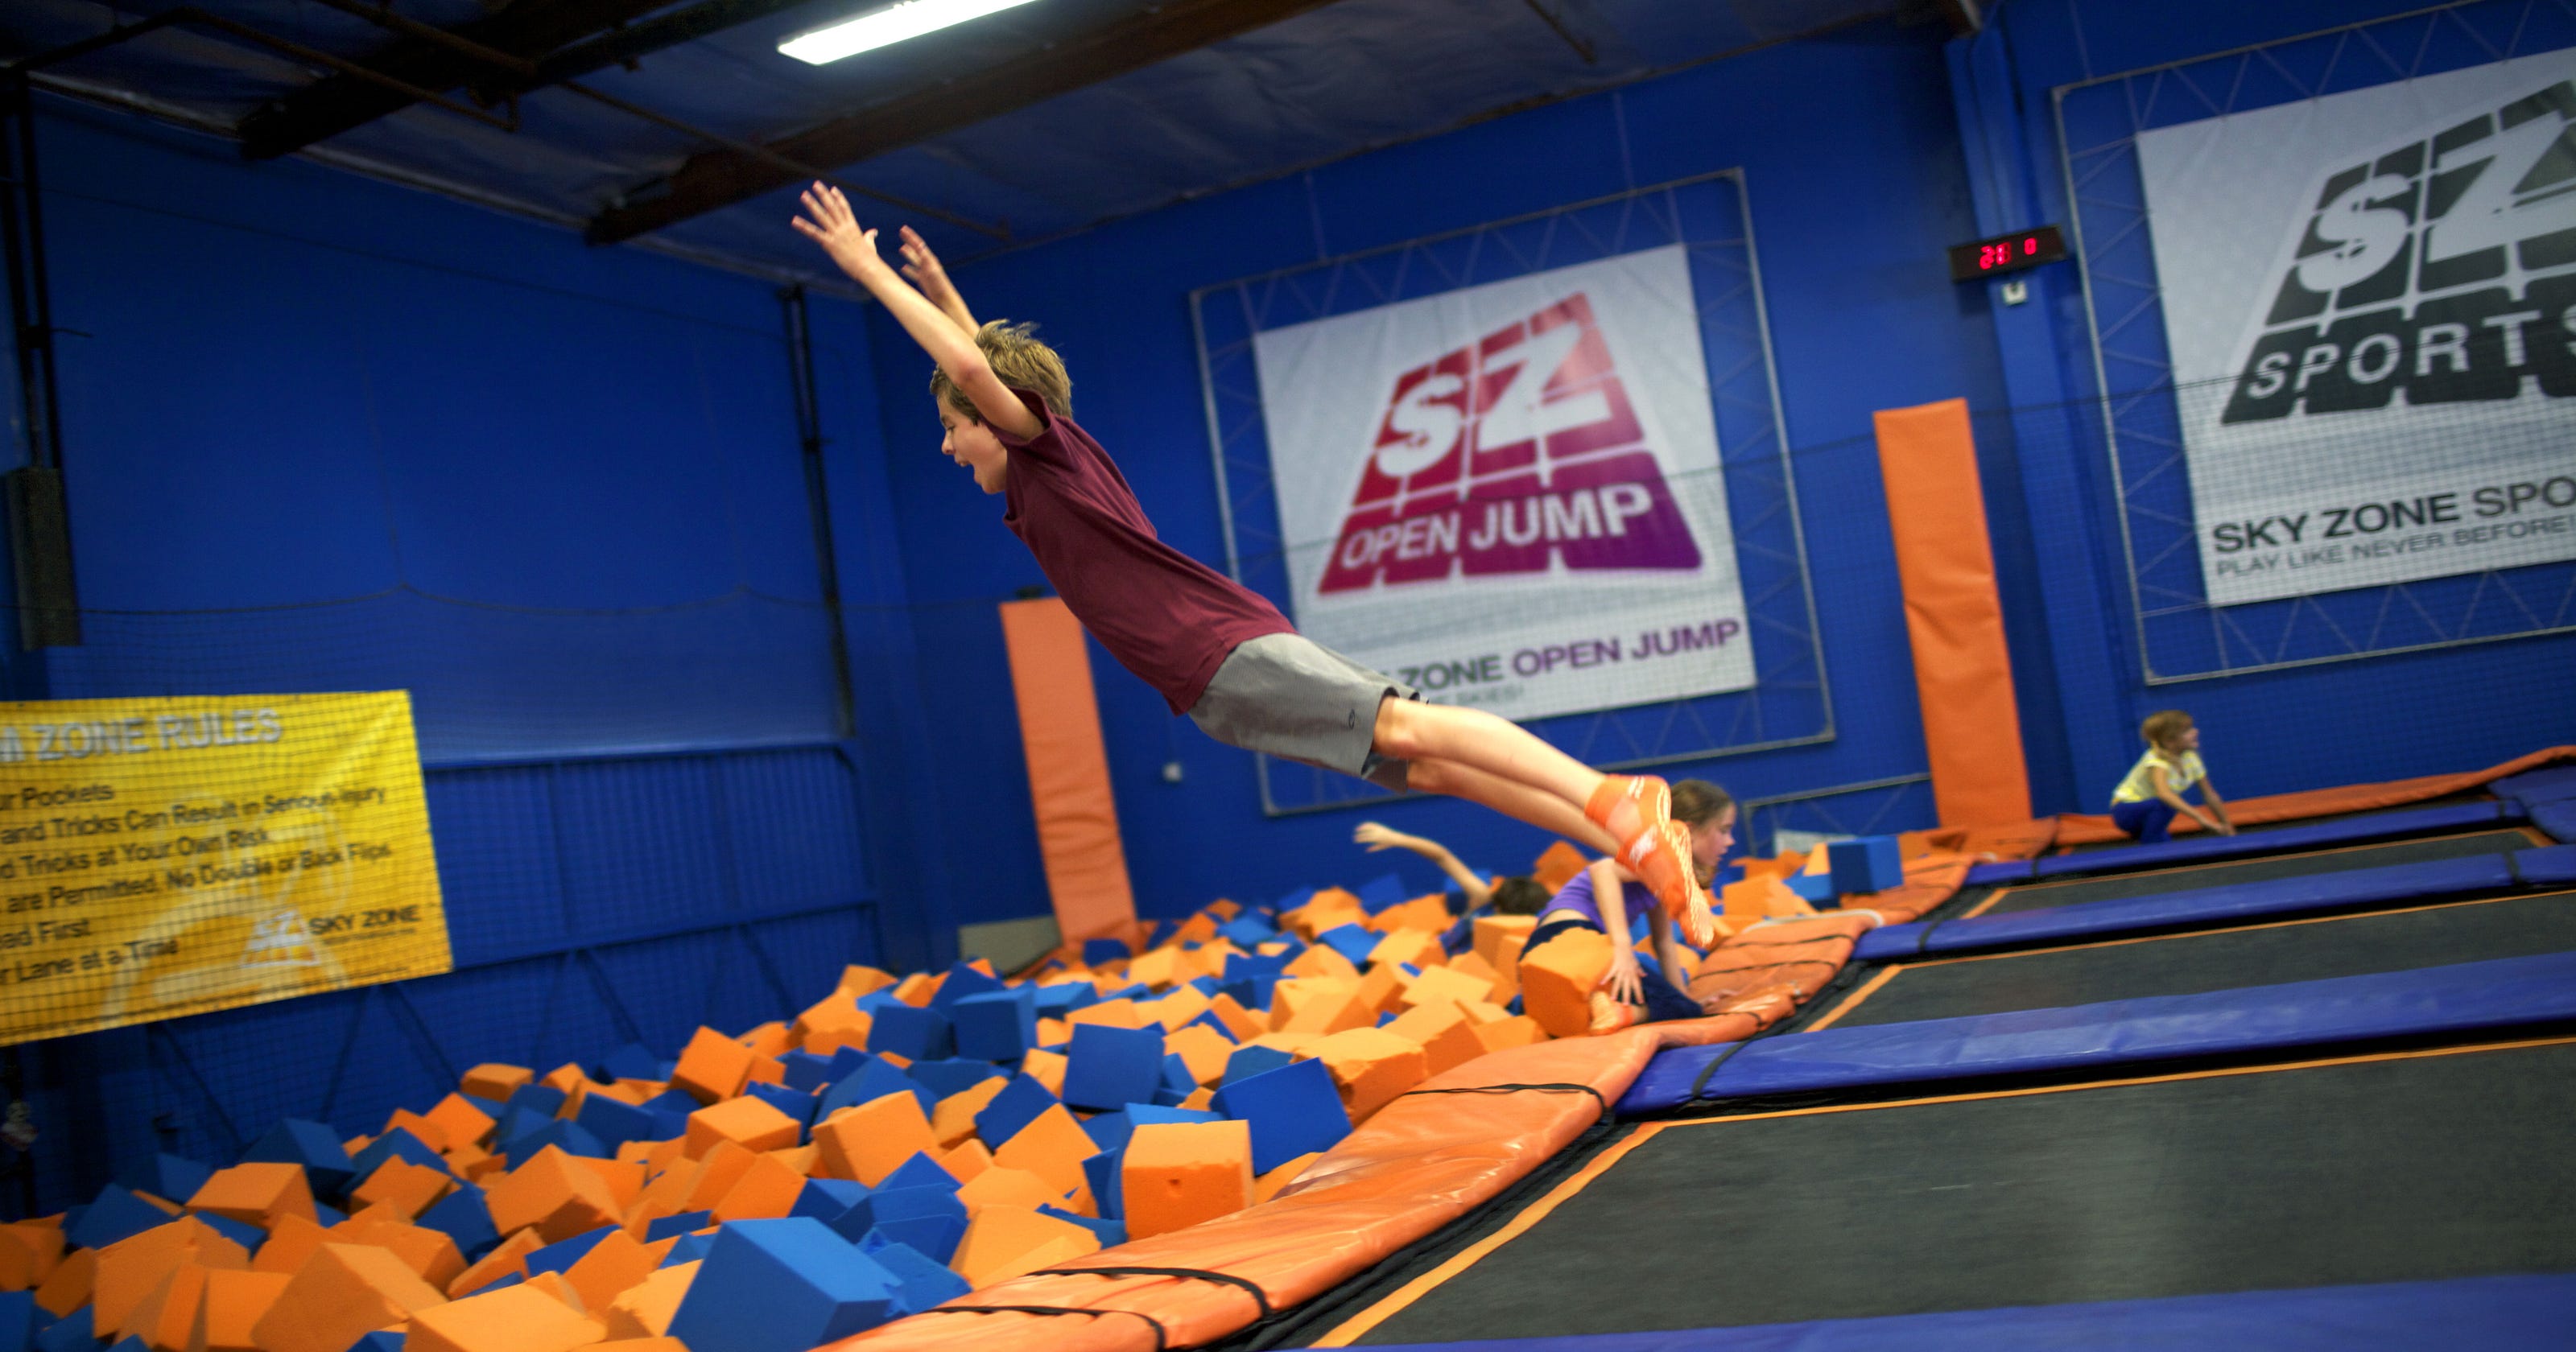 Sky Zone coming to Tallahassee